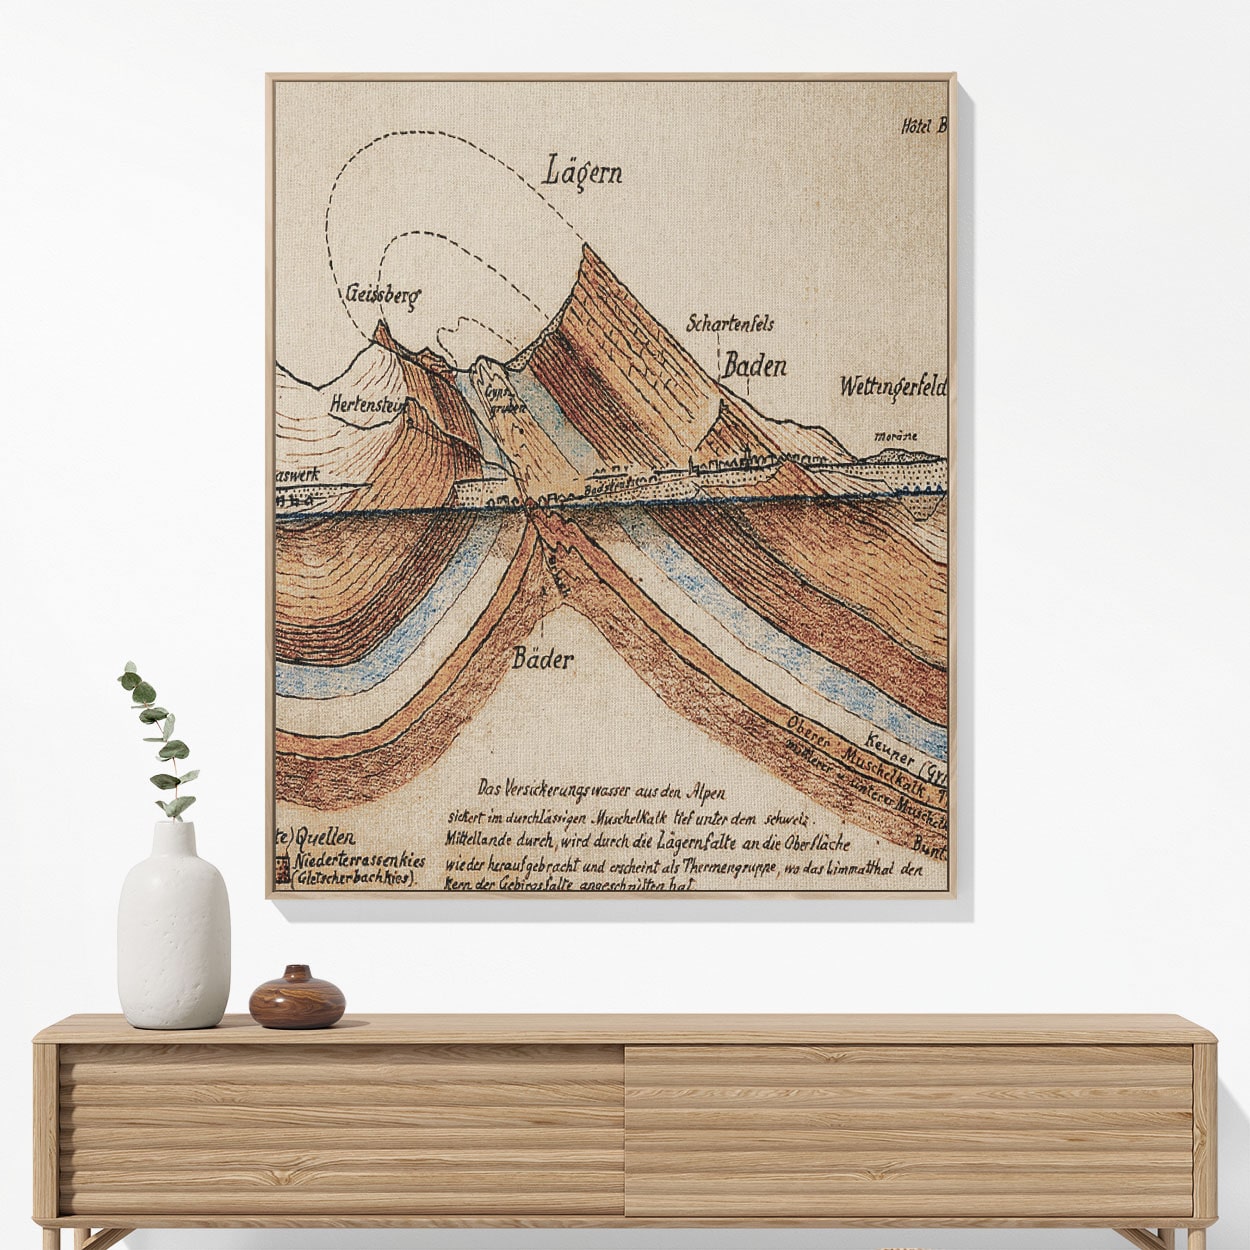 Vintage Scientific Woven Blanket Woven Blanket Hanging on a Wall as Framed Wall Art